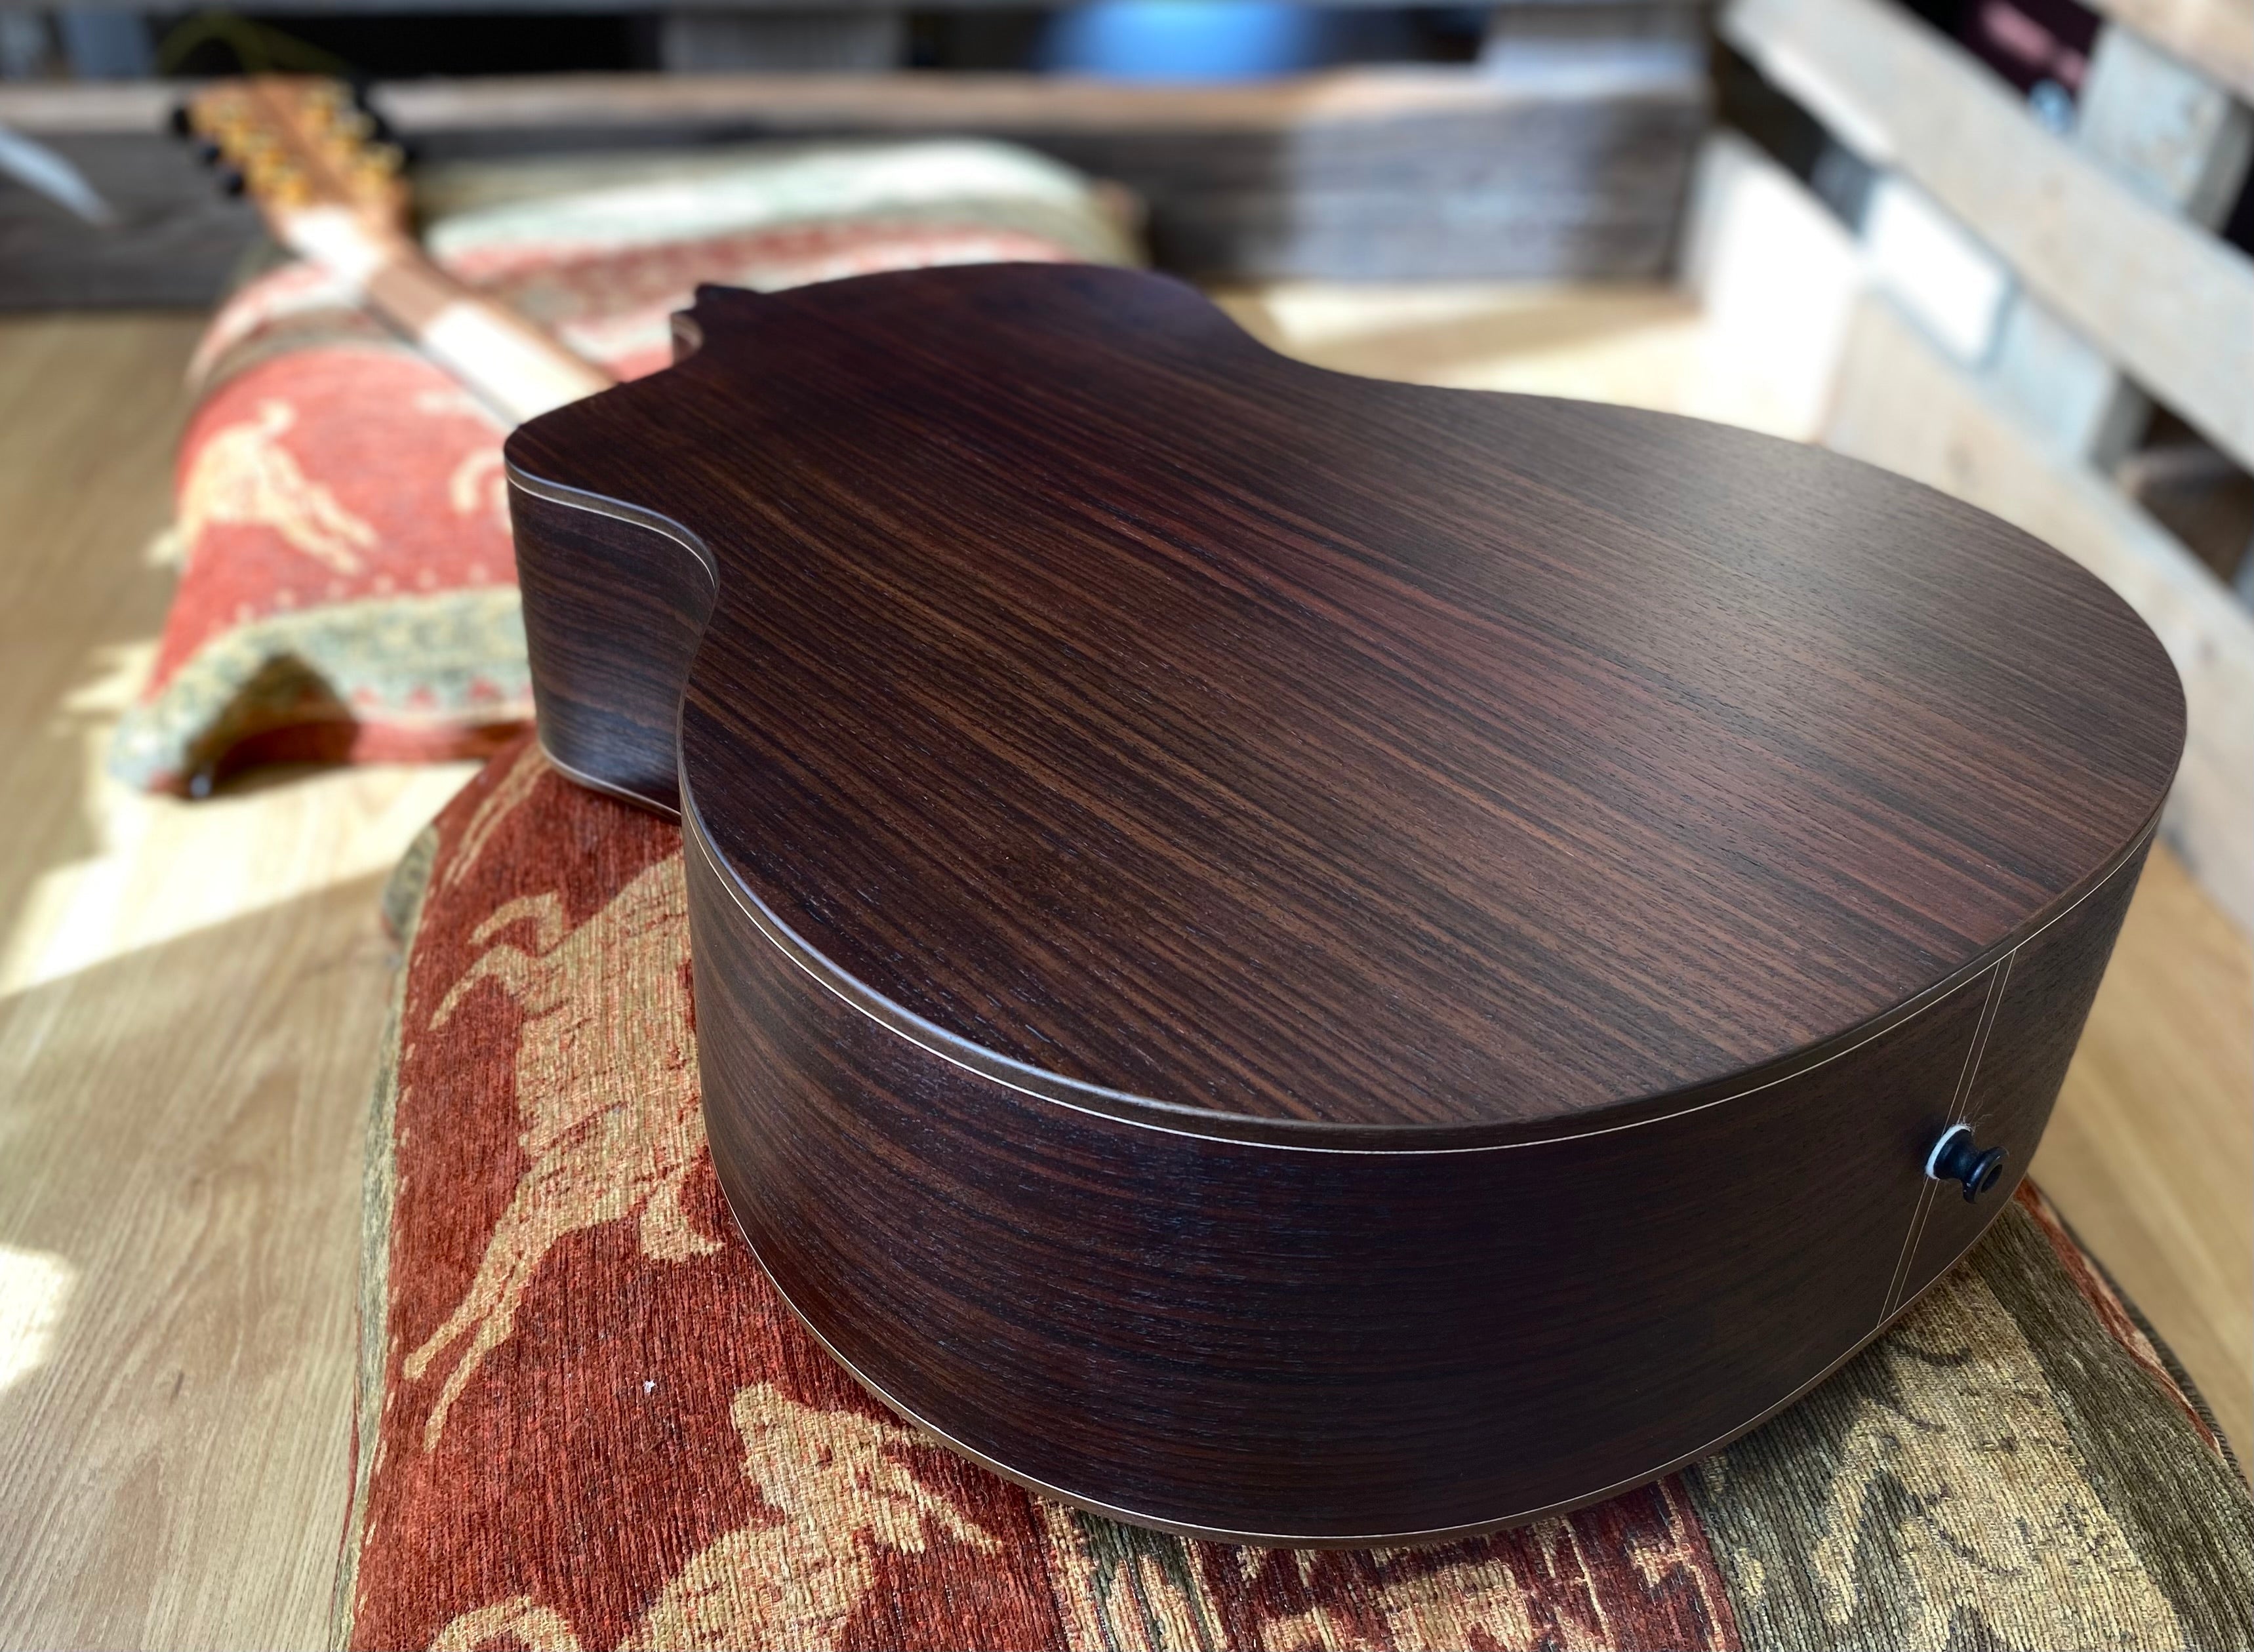 Dowina Rosewood GAC SWS - Exclusive To Richards Guitars, Acoustic Guitar for sale at Richards Guitars.